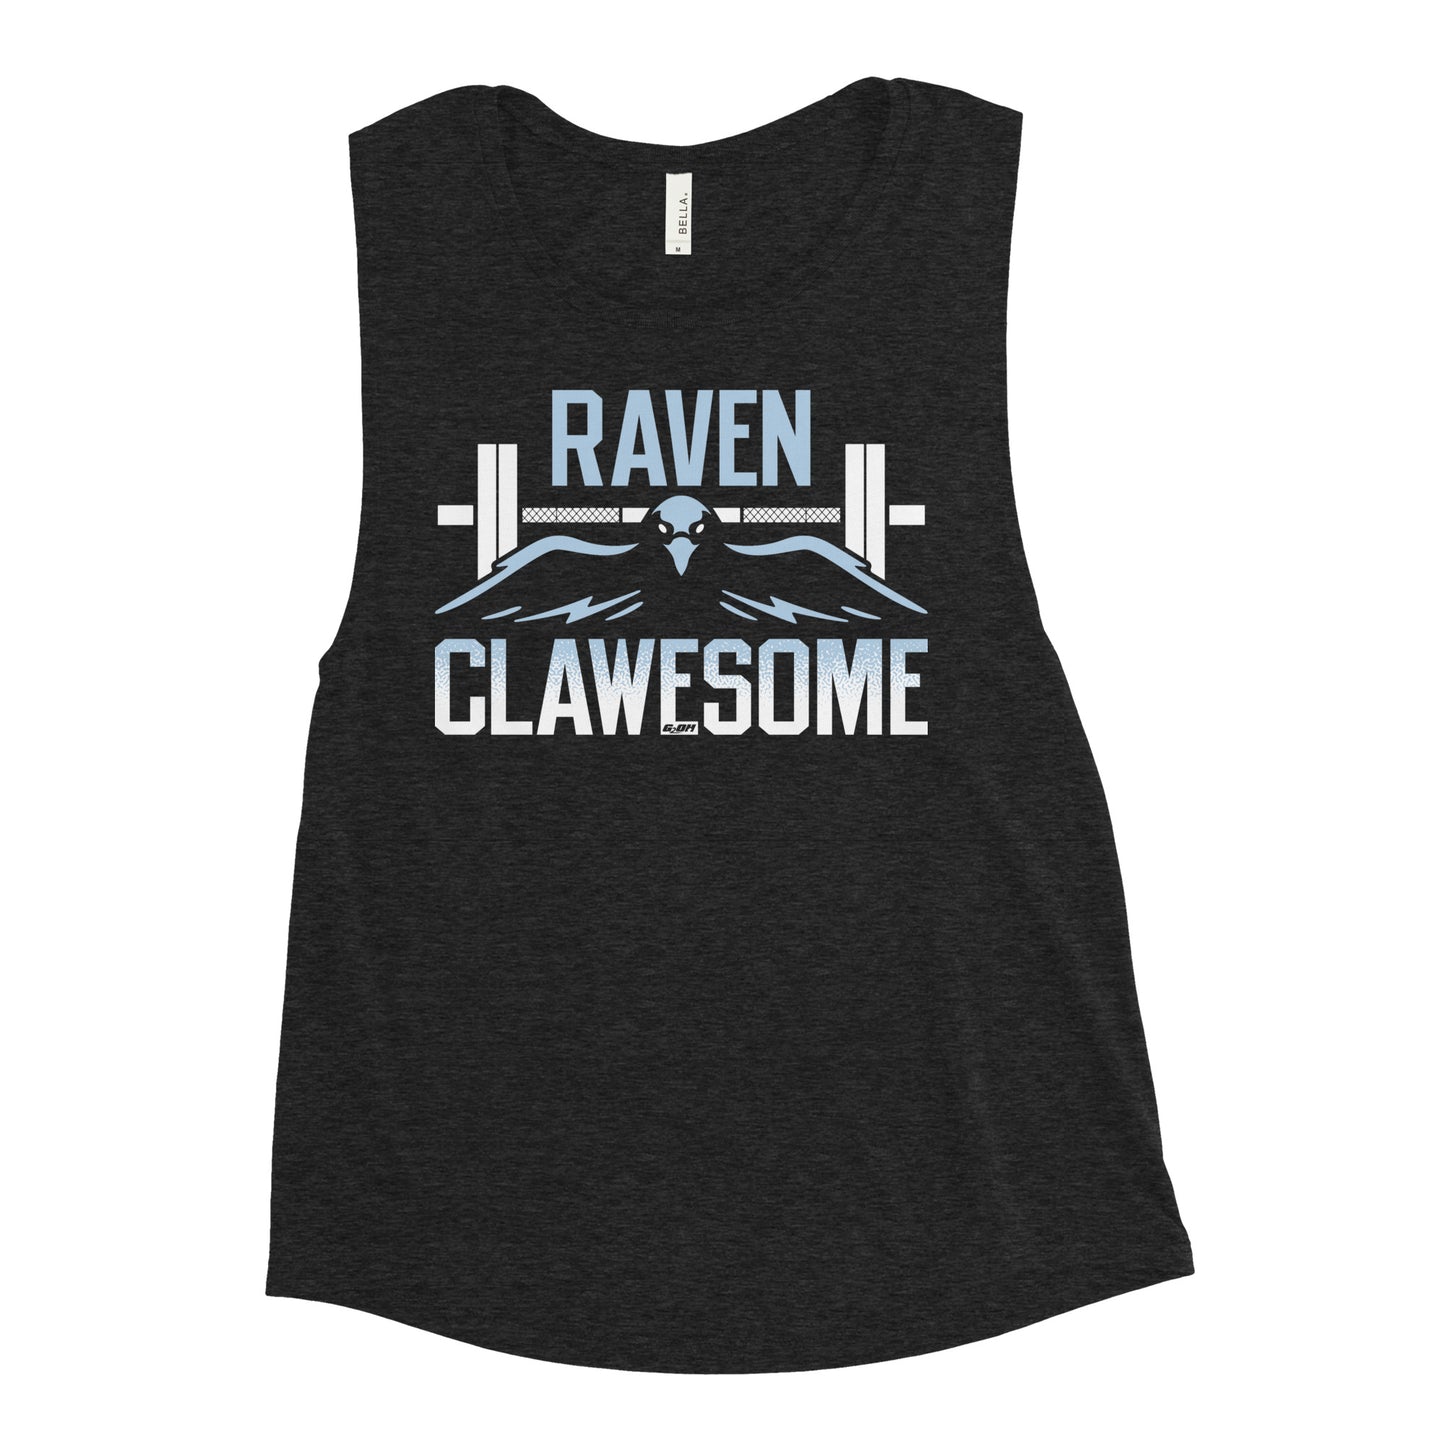 Raven Clawesome Women's Muscle Tank